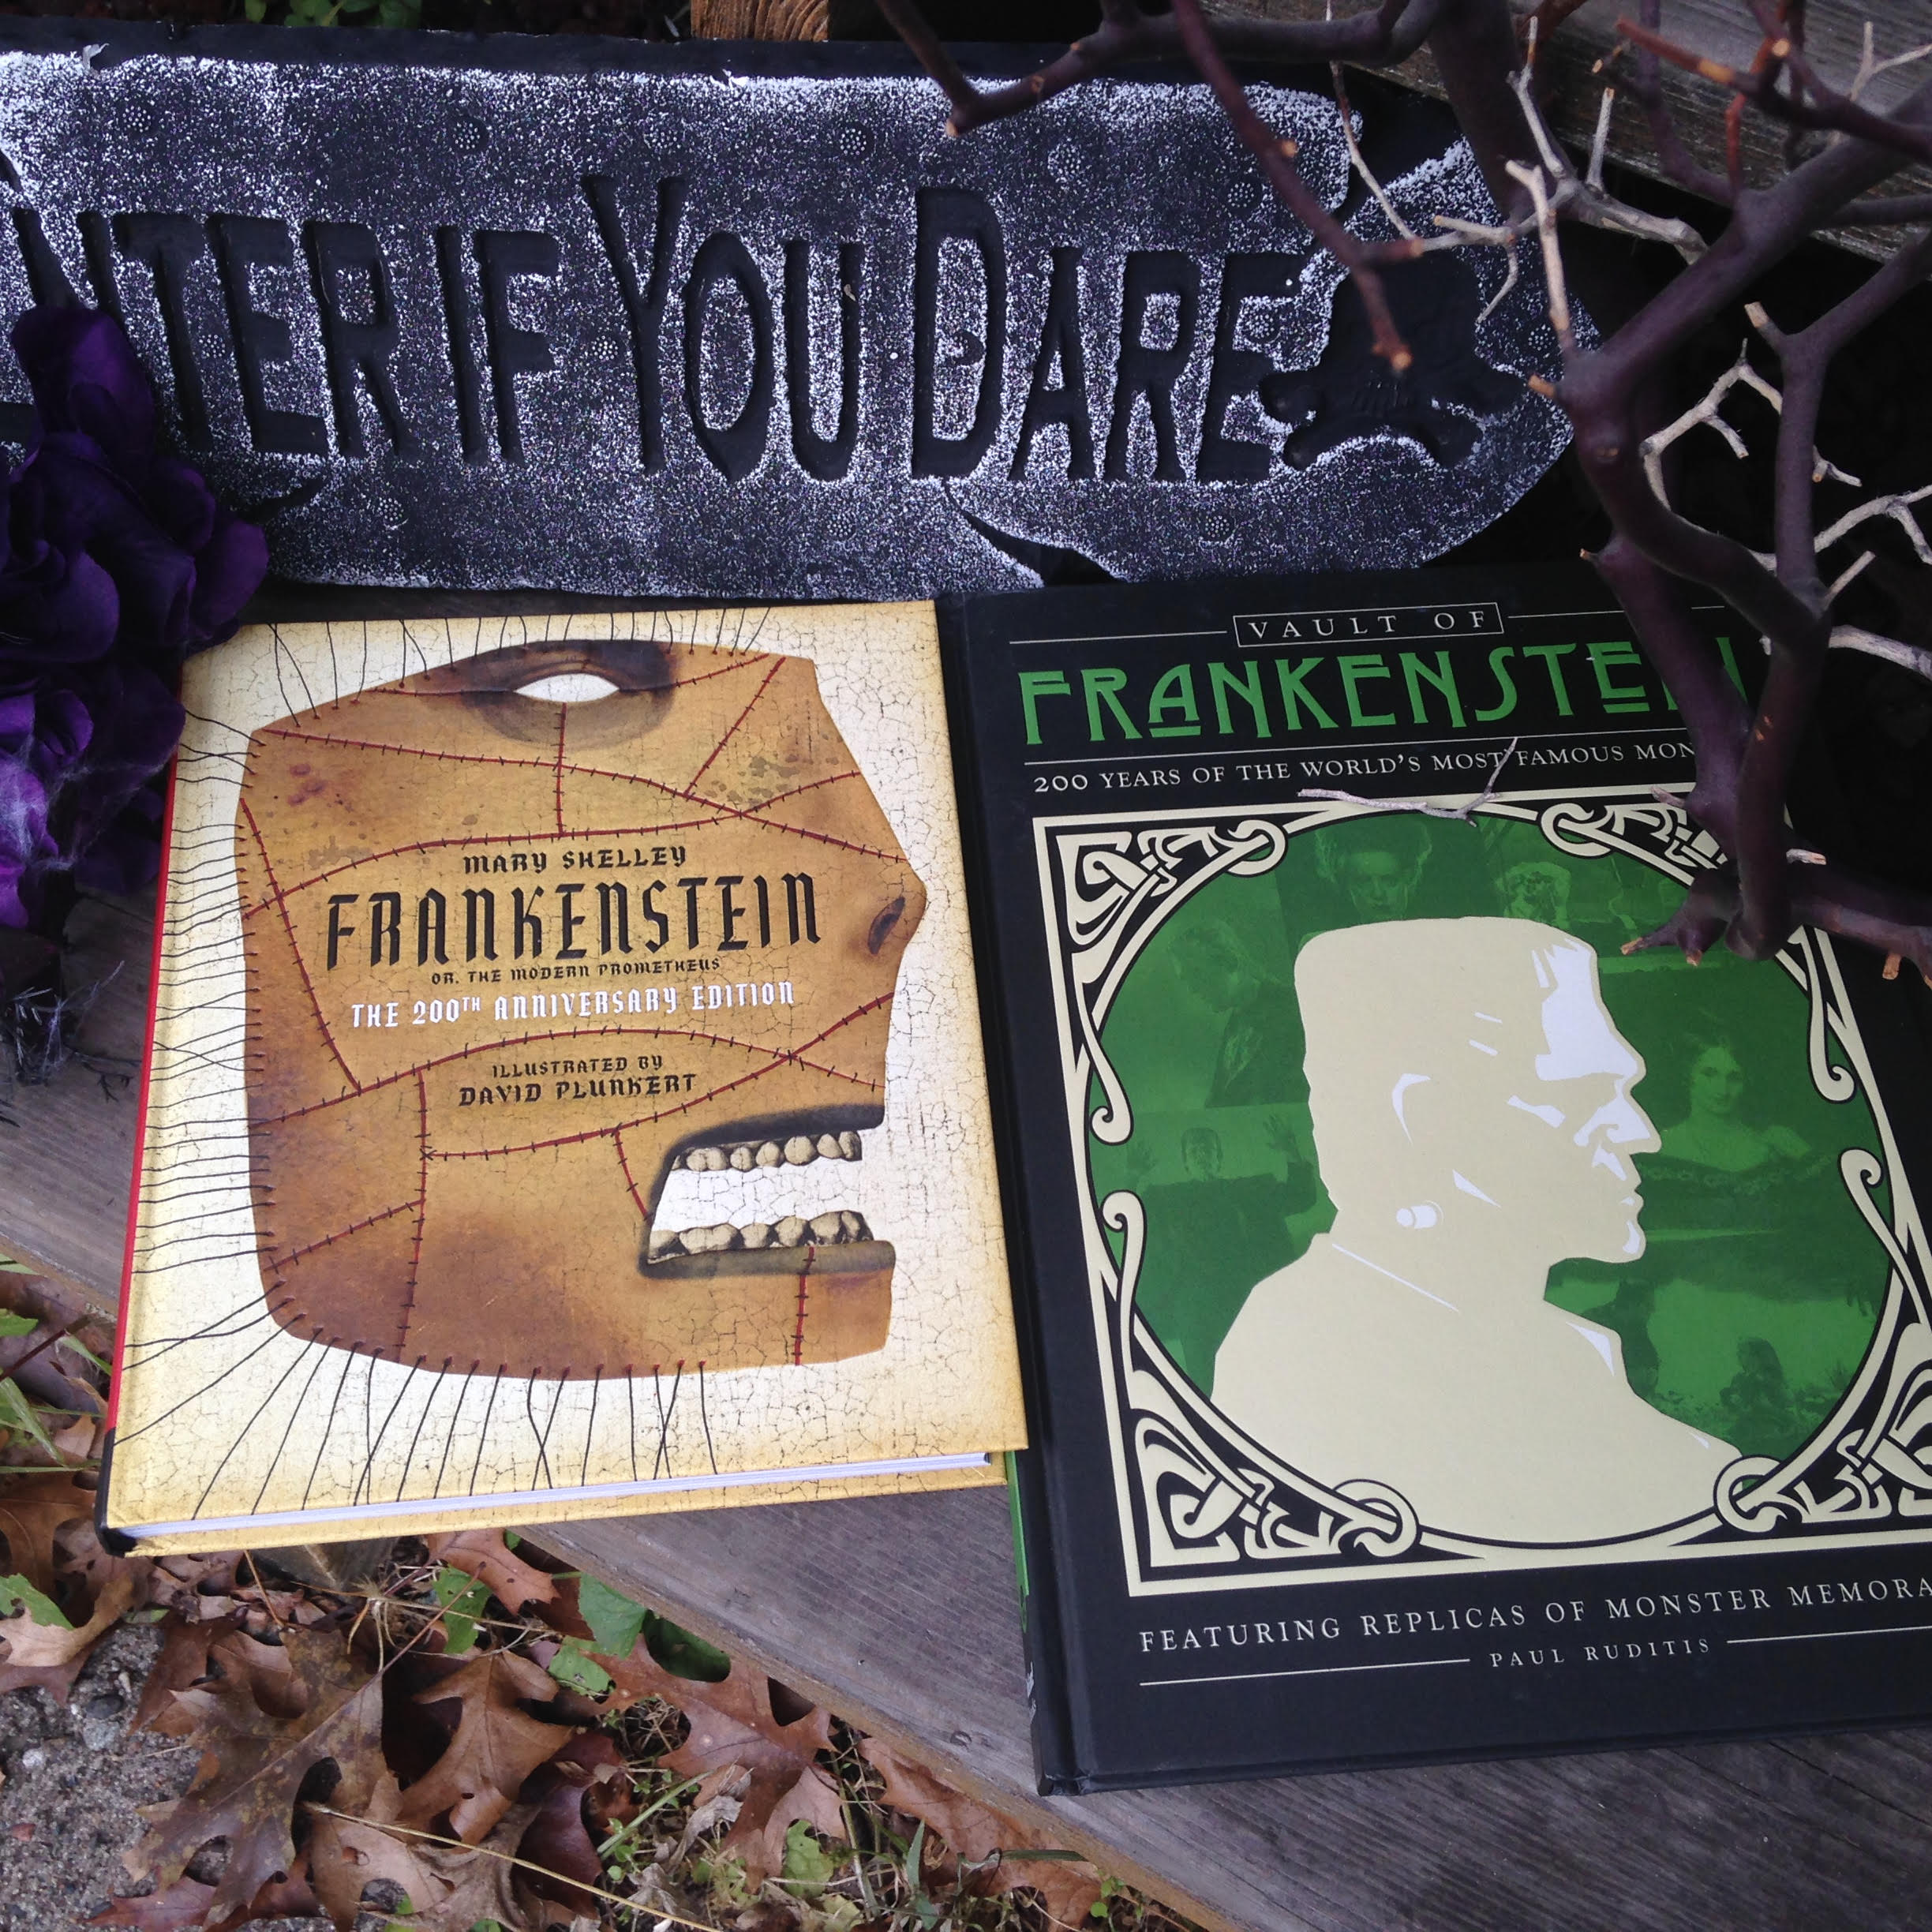 From the Vault of Frankenstein; 200 Years of SCARY!